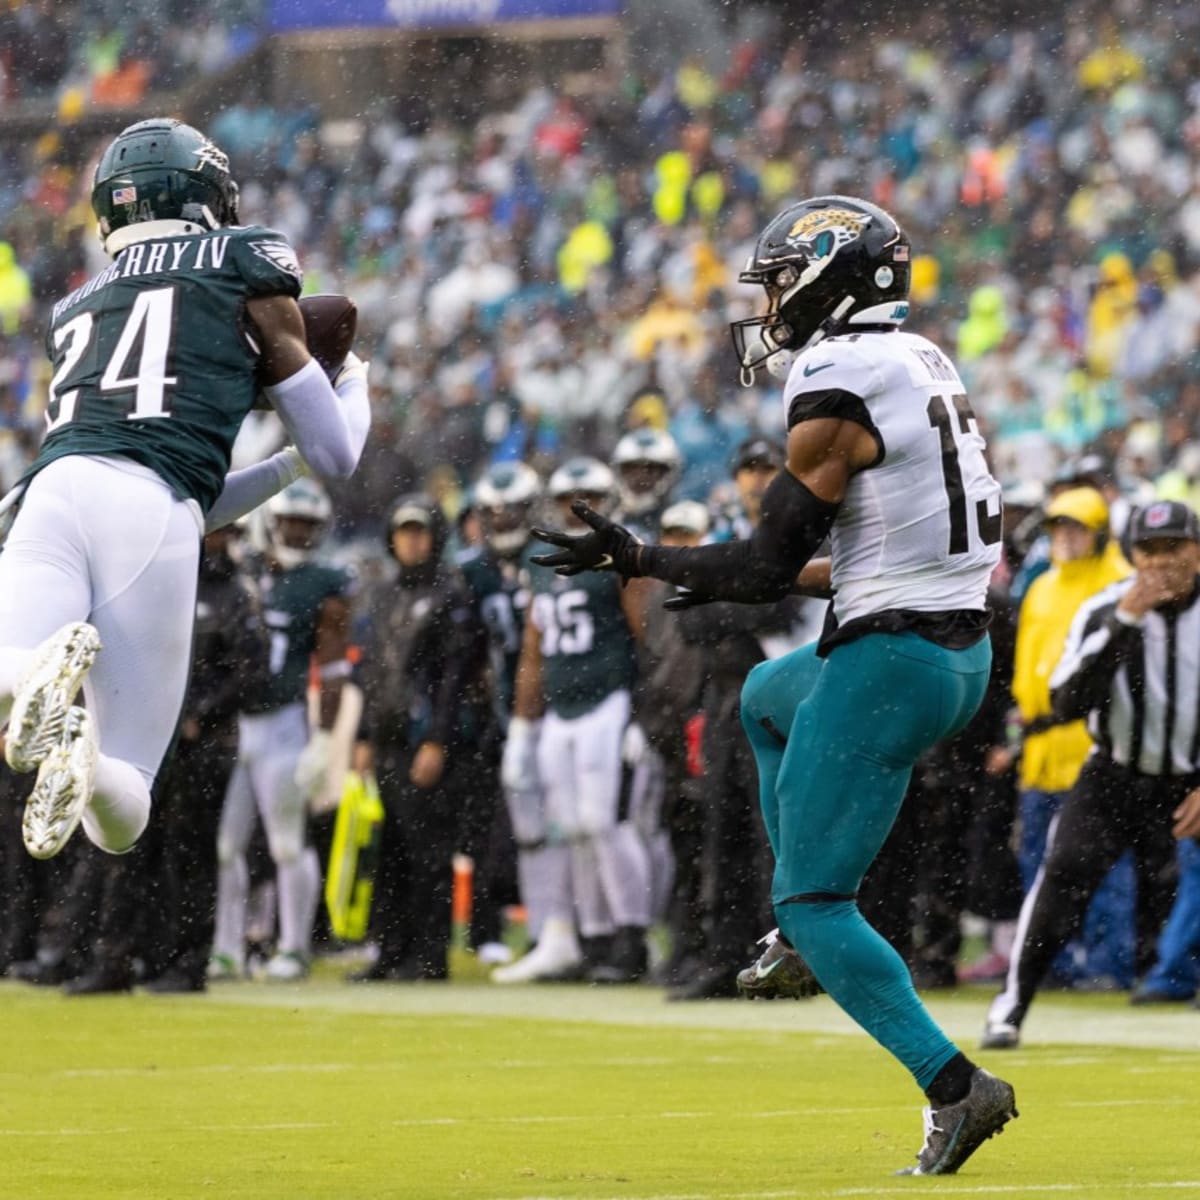 Eagles cornerback James Bradberry contemplates an uncertain future after  late play infamy